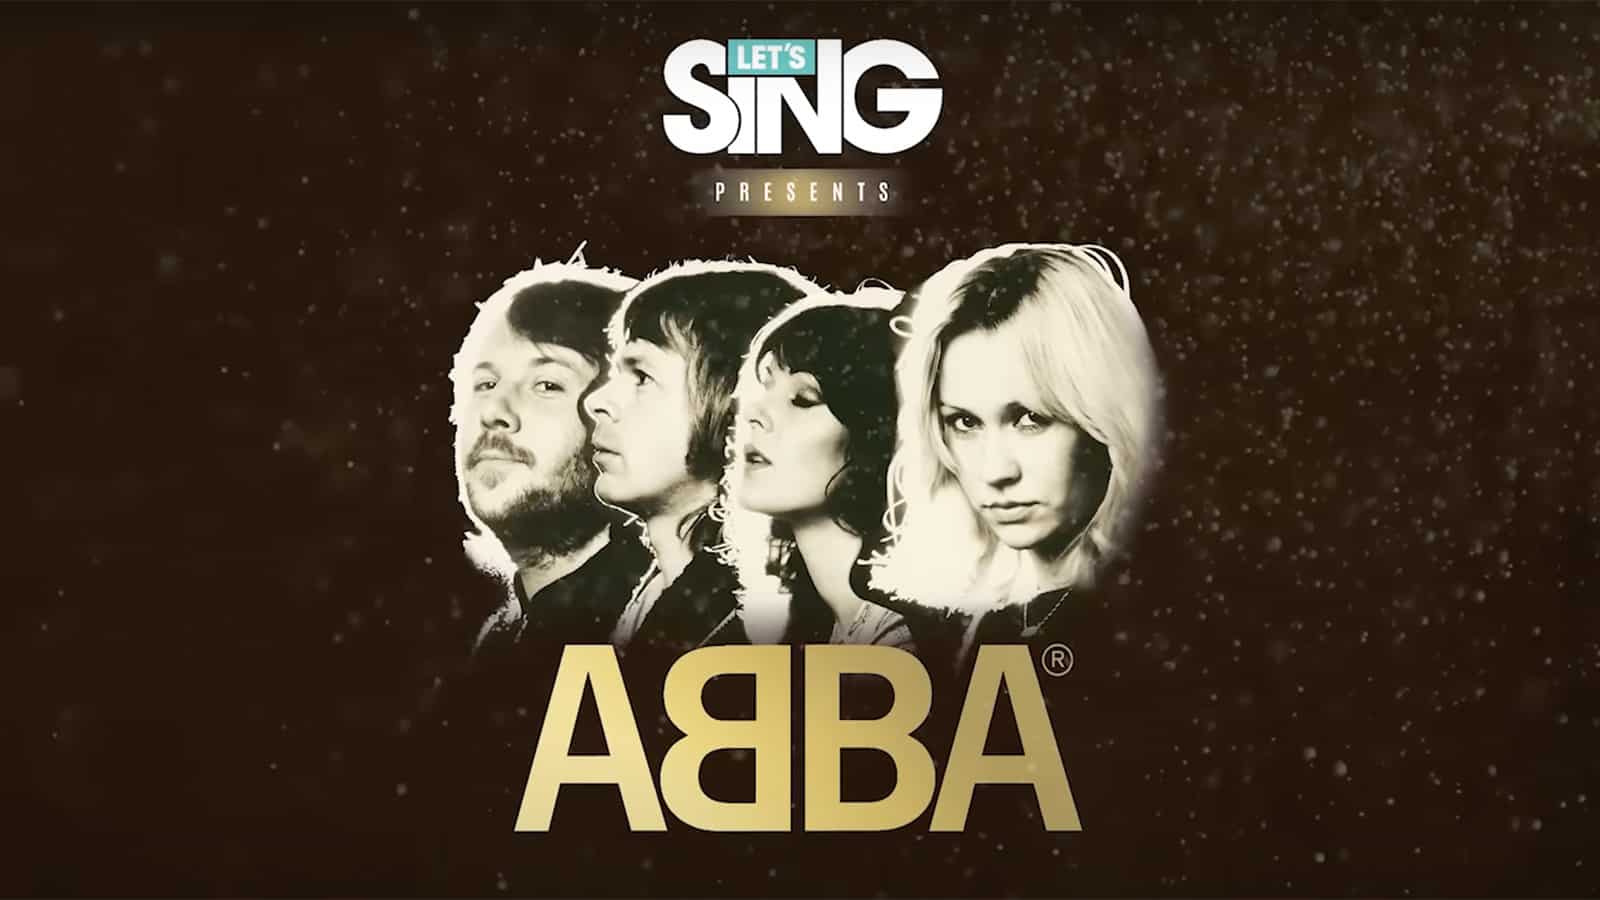 Voxler Announces Let’s Sing ABBA For PlayStation, Xbox, Switch